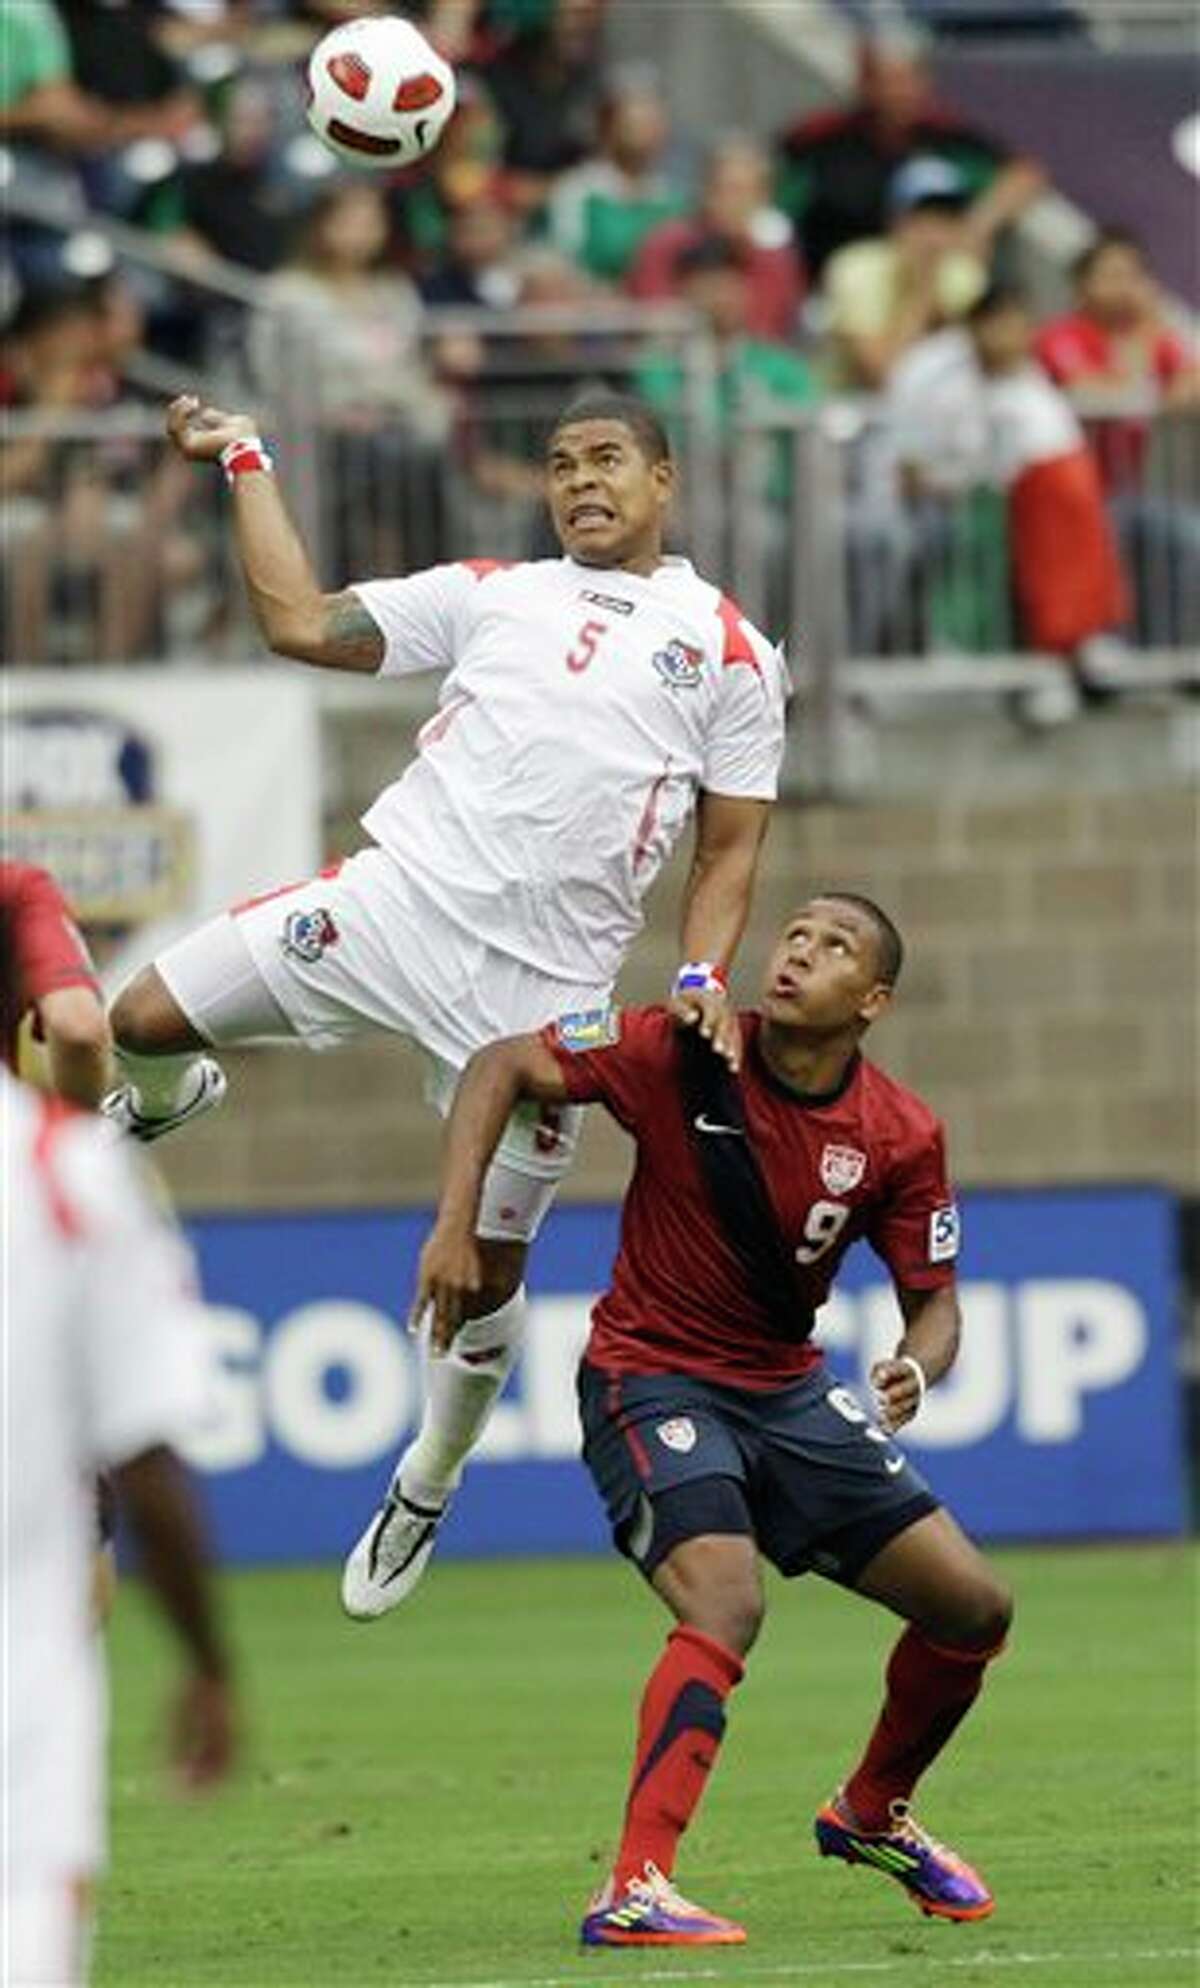 Panama's Roman Torres (5) and United States' Juan Agudelo (9) go after the ball during the first half of a CONCACAF Gold Cup semifinal soccer match Wednesday, June 22, 2011, in Houston. (AP Photo/David J. Phillip)